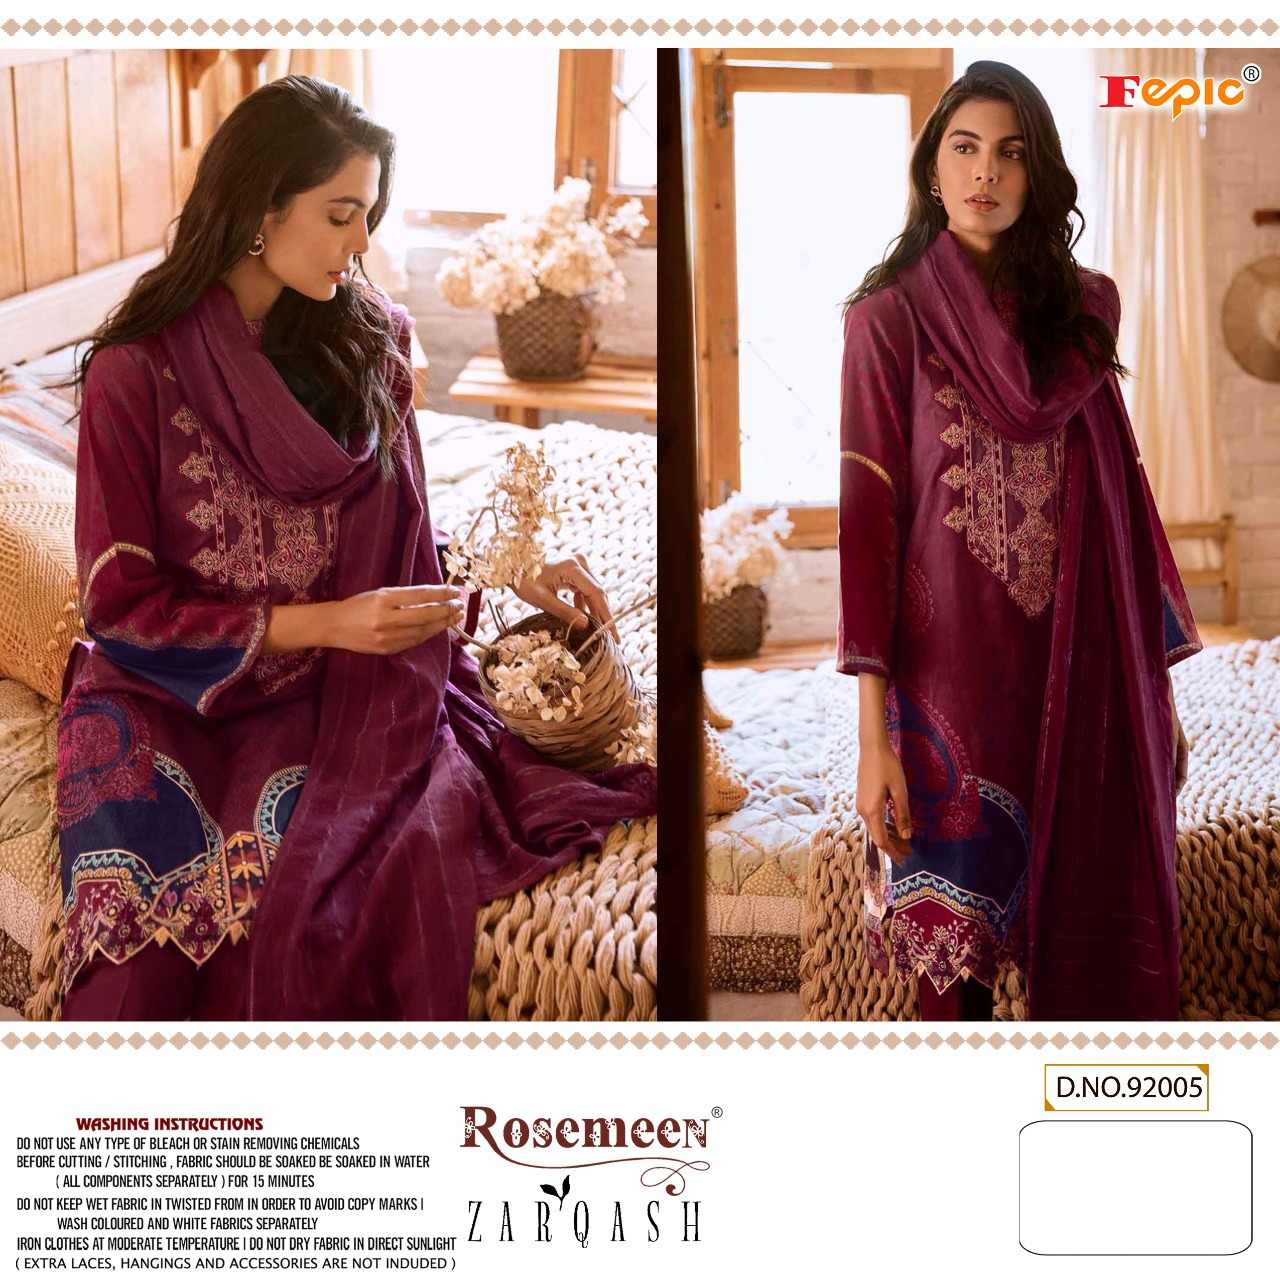 Fepic rosemeen zarqash cambric cotton exclusive embroidary look salwar suit with shiffon dupatta catalog